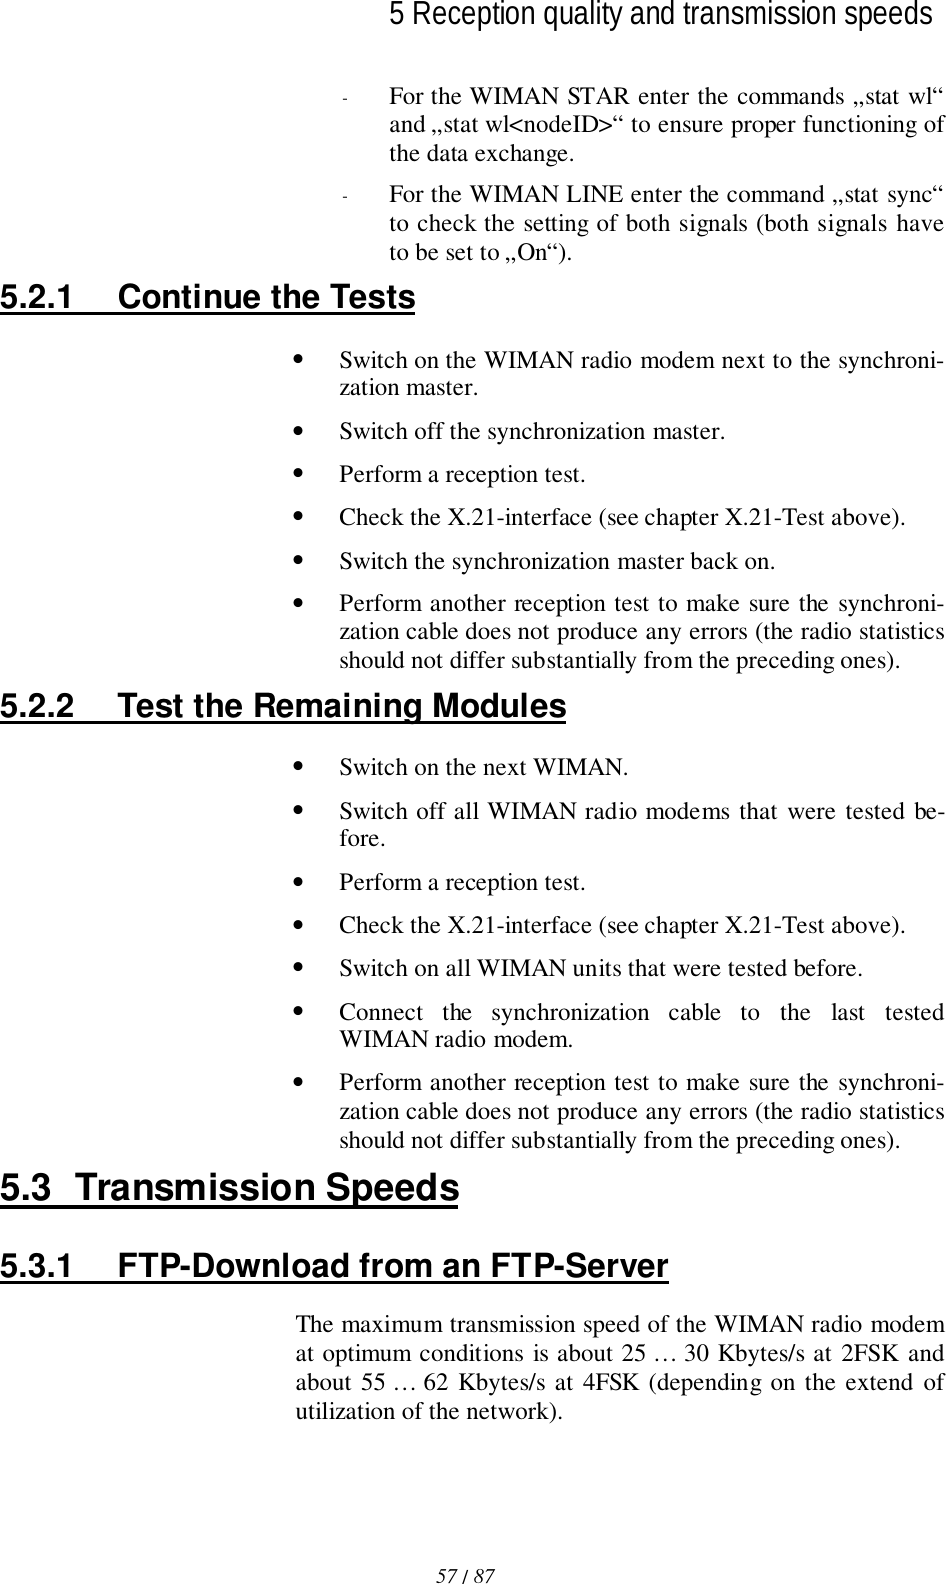 5 Reception quality and transmission speeds57 / 87l- For the WIMAN STAR enter the commands „stat wl“and „stat wl&lt;nodeID&gt;“ to ensure proper functioning ofthe data exchange.- For the WIMAN LINE enter the command „stat sync“to check the setting of both signals (both signals haveto be set to „On“).5.2.1  Continue the Tests• Switch on the WIMAN radio modem next to the synchroni-zation master.• Switch off the synchronization master.• Perform a reception test.• Check the X.21-interface (see chapter X.21-Test above).• Switch the synchronization master back on.• Perform another reception test to make sure the synchroni-zation cable does not produce any errors (the radio statisticsshould not differ substantially from the preceding ones).5.2.2  Test the Remaining Modules• Switch on the next WIMAN.• Switch off all WIMAN radio modems that were tested be-fore.• Perform a reception test.• Check the X.21-interface (see chapter X.21-Test above).• Switch on all WIMAN units that were tested before.• Connect the synchronization cable to the last testedWIMAN radio modem.• Perform another reception test to make sure the synchroni-zation cable does not produce any errors (the radio statisticsshould not differ substantially from the preceding ones).5.3 Transmission Speeds5.3.1  FTP-Download from an FTP-ServerThe maximum transmission speed of the WIMAN radio modemat optimum conditions is about 25 … 30 Kbytes/s at 2FSK andabout 55 … 62 Kbytes/s at 4FSK (depending on the extend ofutilization of the network).